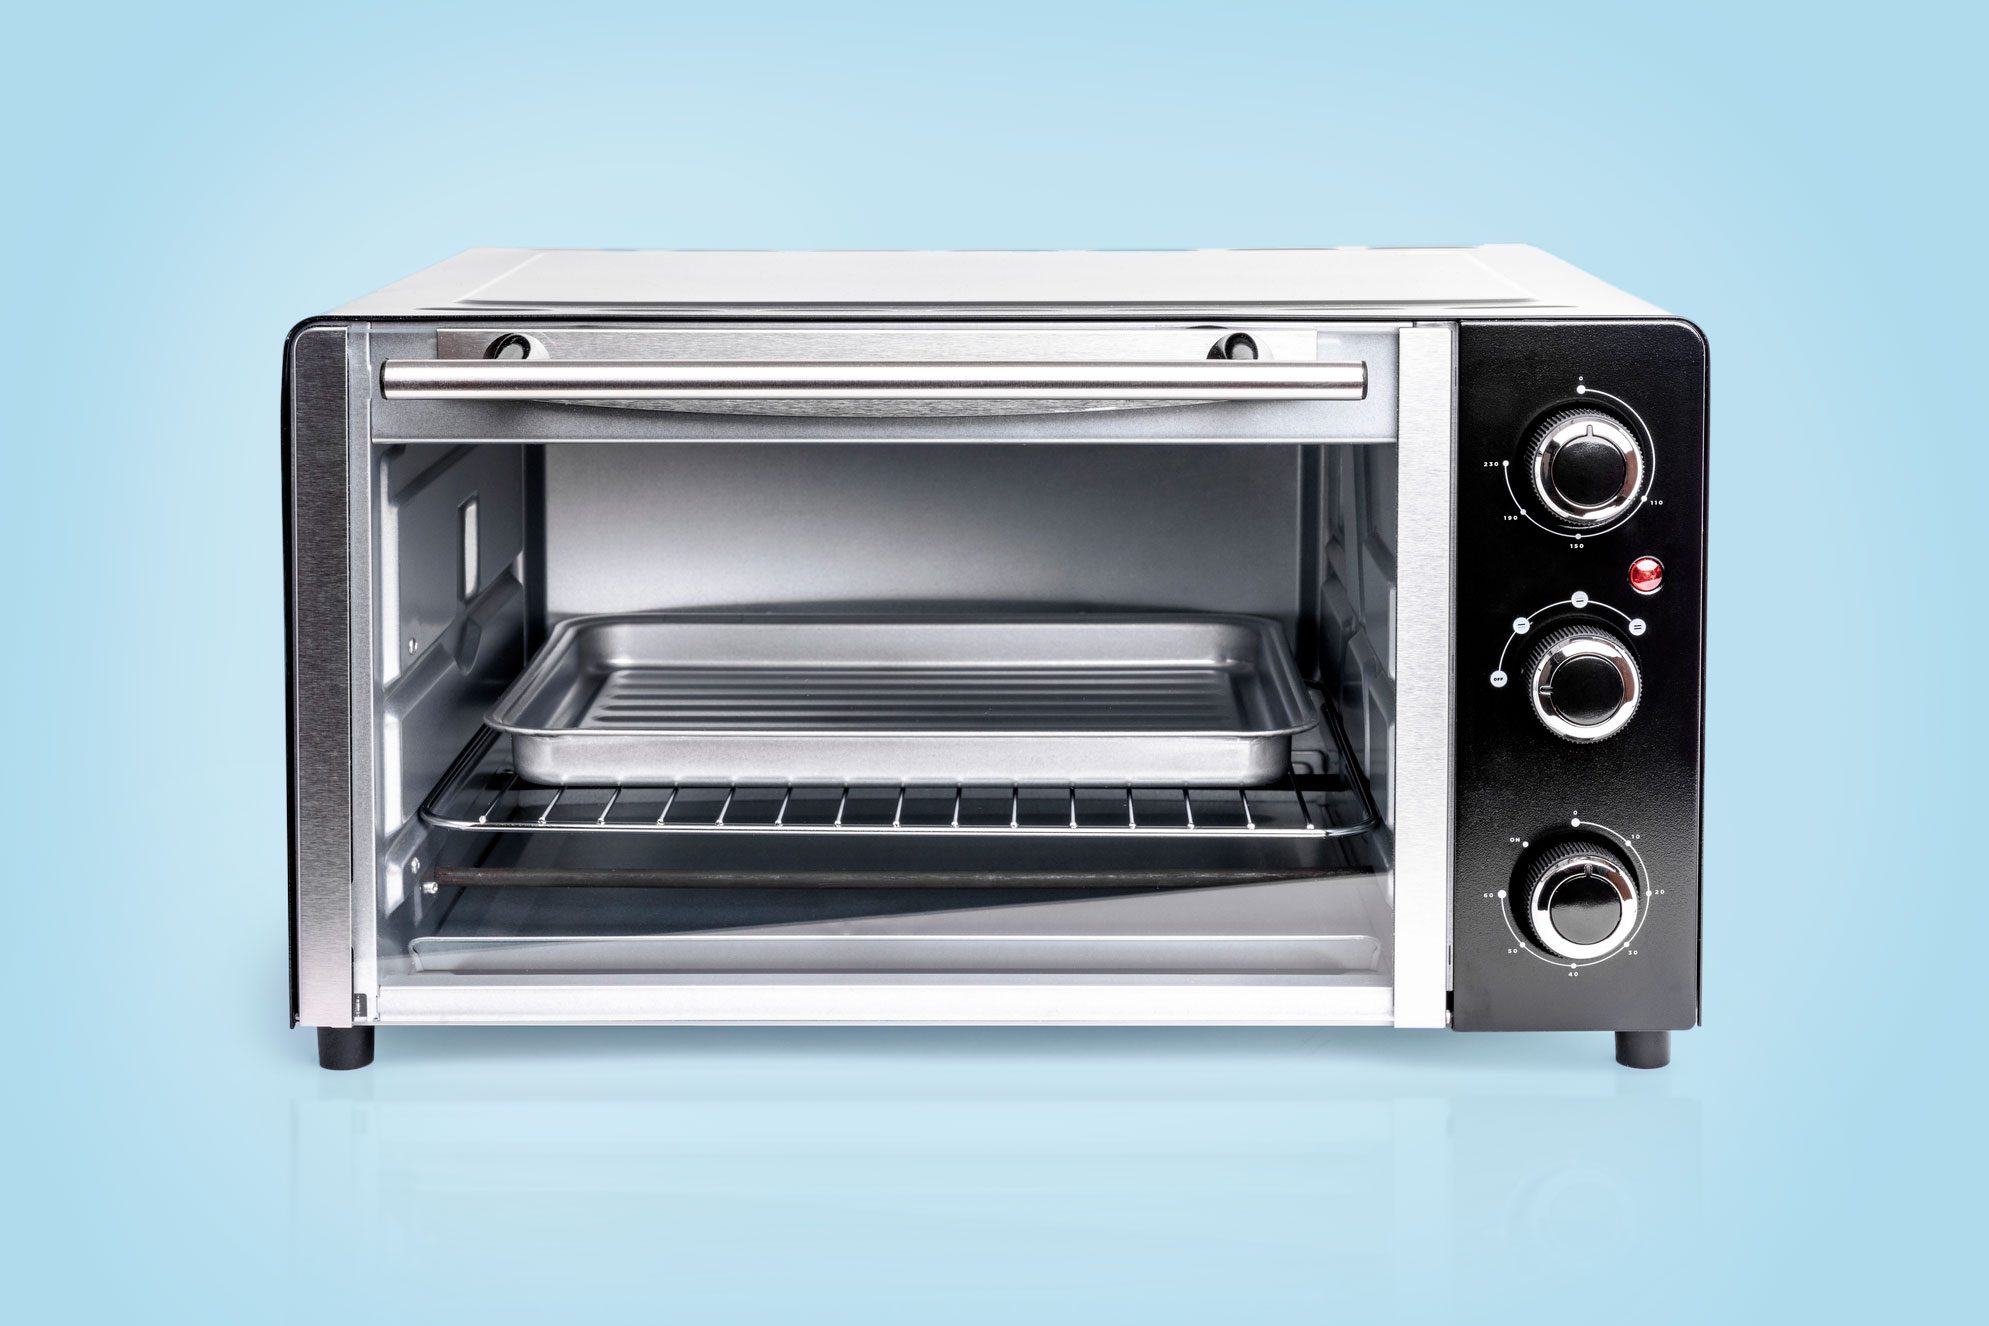 https://www.rd.com/wp-content/uploads/2023/03/GettyImages-1248278504-toaster-oven.jpg?fit=680%2C454